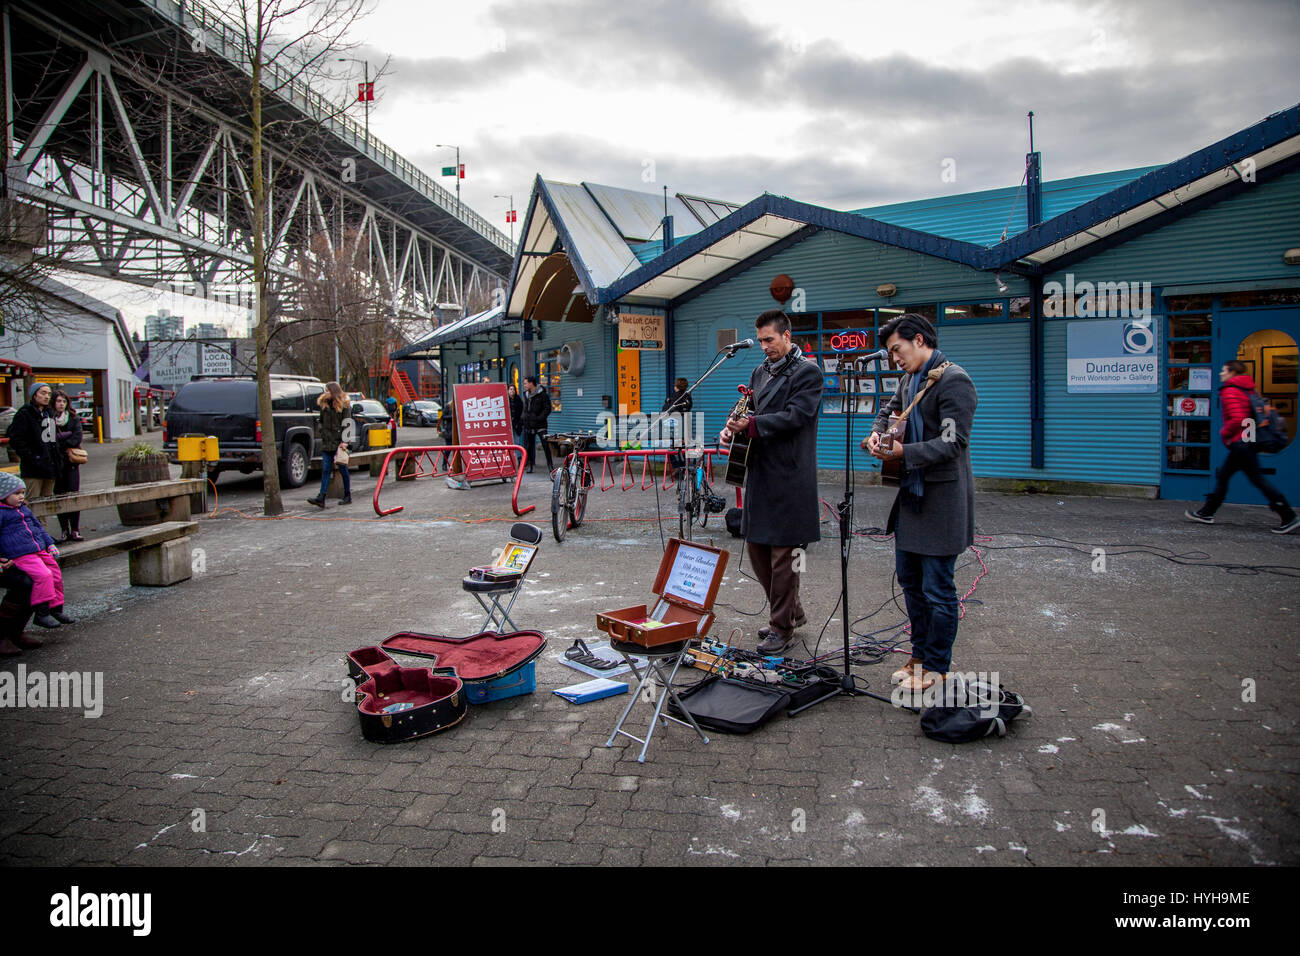 Young guitarists and singer performing outdoors, Granville Island, Vancouver, British Columbia, Canada Stock Photo